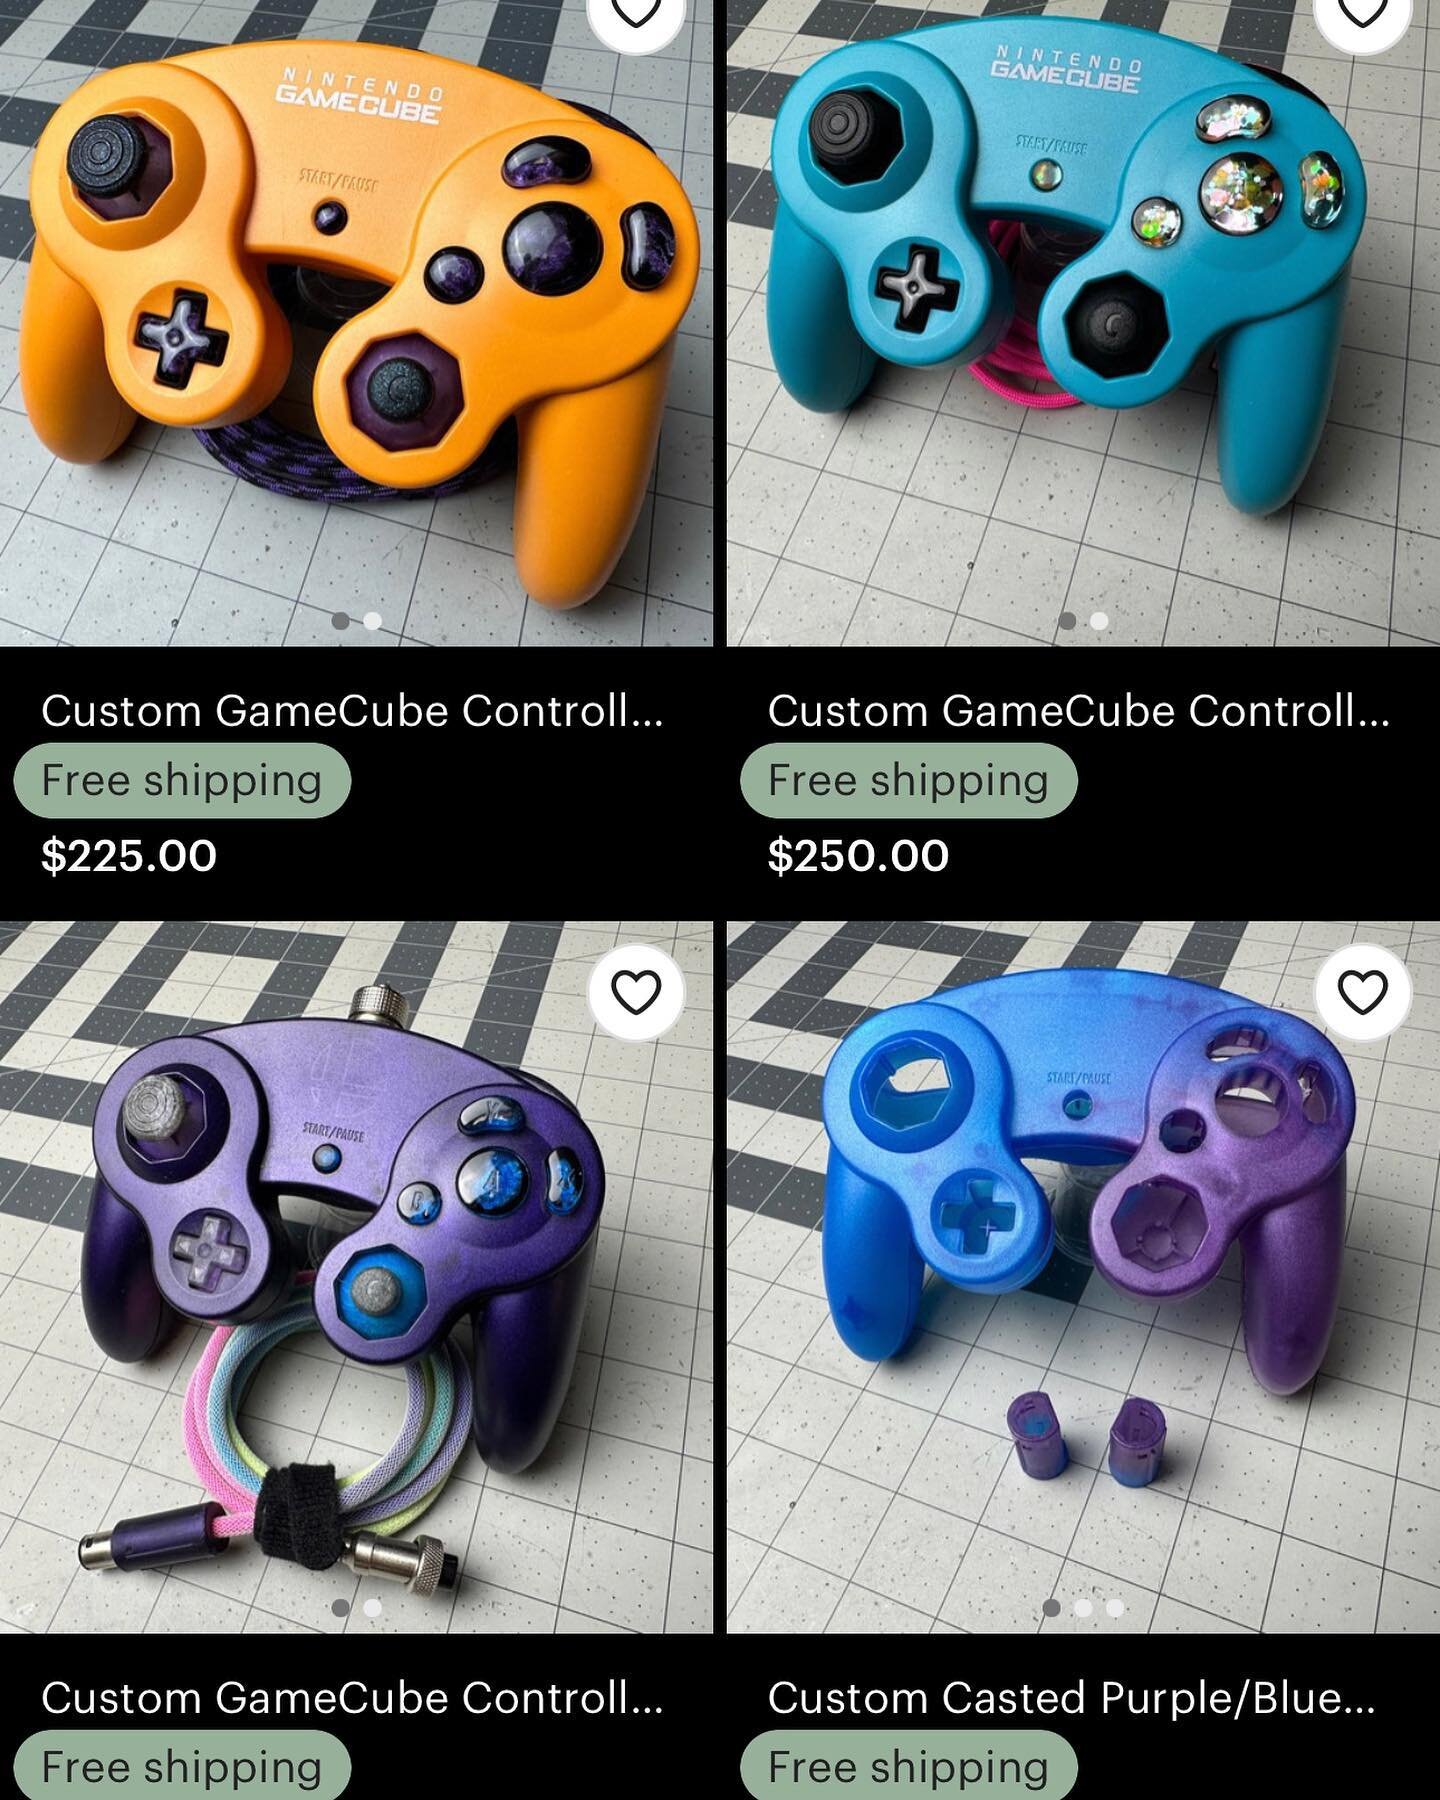 Just listed a few full controller builds, including a couple budget-ish options over on my Etsy! 
&bull;
&bull;
&bull;
------------------------------
&bull;
&bull;
&bull;
#supersmashbros #supersmashbrosultimate #smashbros #smashultimate #supersmashbr